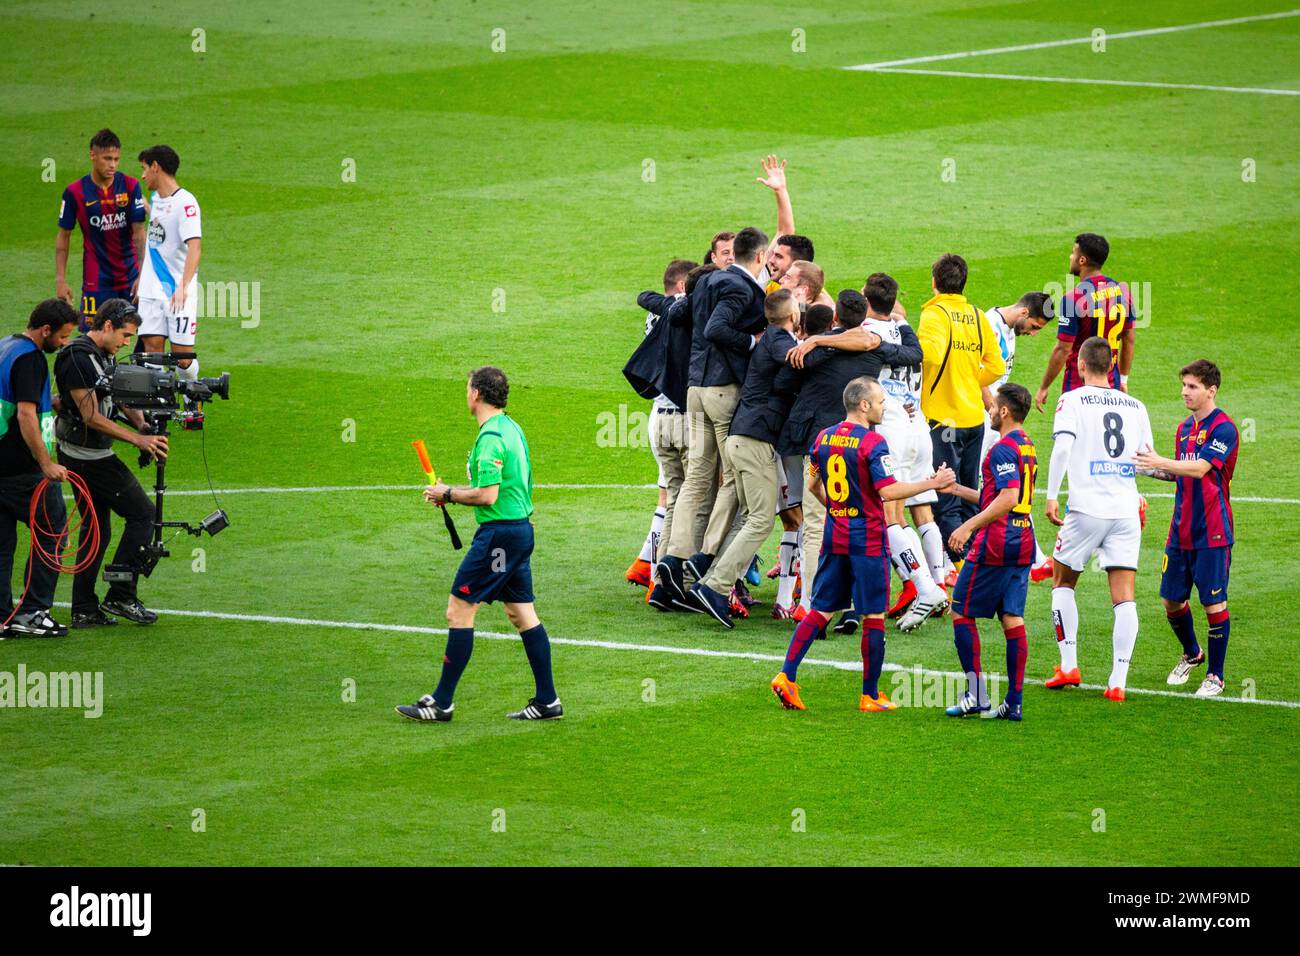 DEPORTIVO, ESCAPE LA LIGA RELEGATION, 2015: Deportivo players celerate wildly at the final whistle as the point ensures La Liga survival. The final game of the La Liga 2014-15 season in Spain between Barcelona FC and Deportivo de La Coruna at Camp Nou, Barcelona on May 23 2015. The Game finished 2-2. Barcelona celebrated winning the championship title and legend Xavi's final home game. Deportiva got the point they needed to avoid relegation. Photograph: Rob Watkins Stock Photo